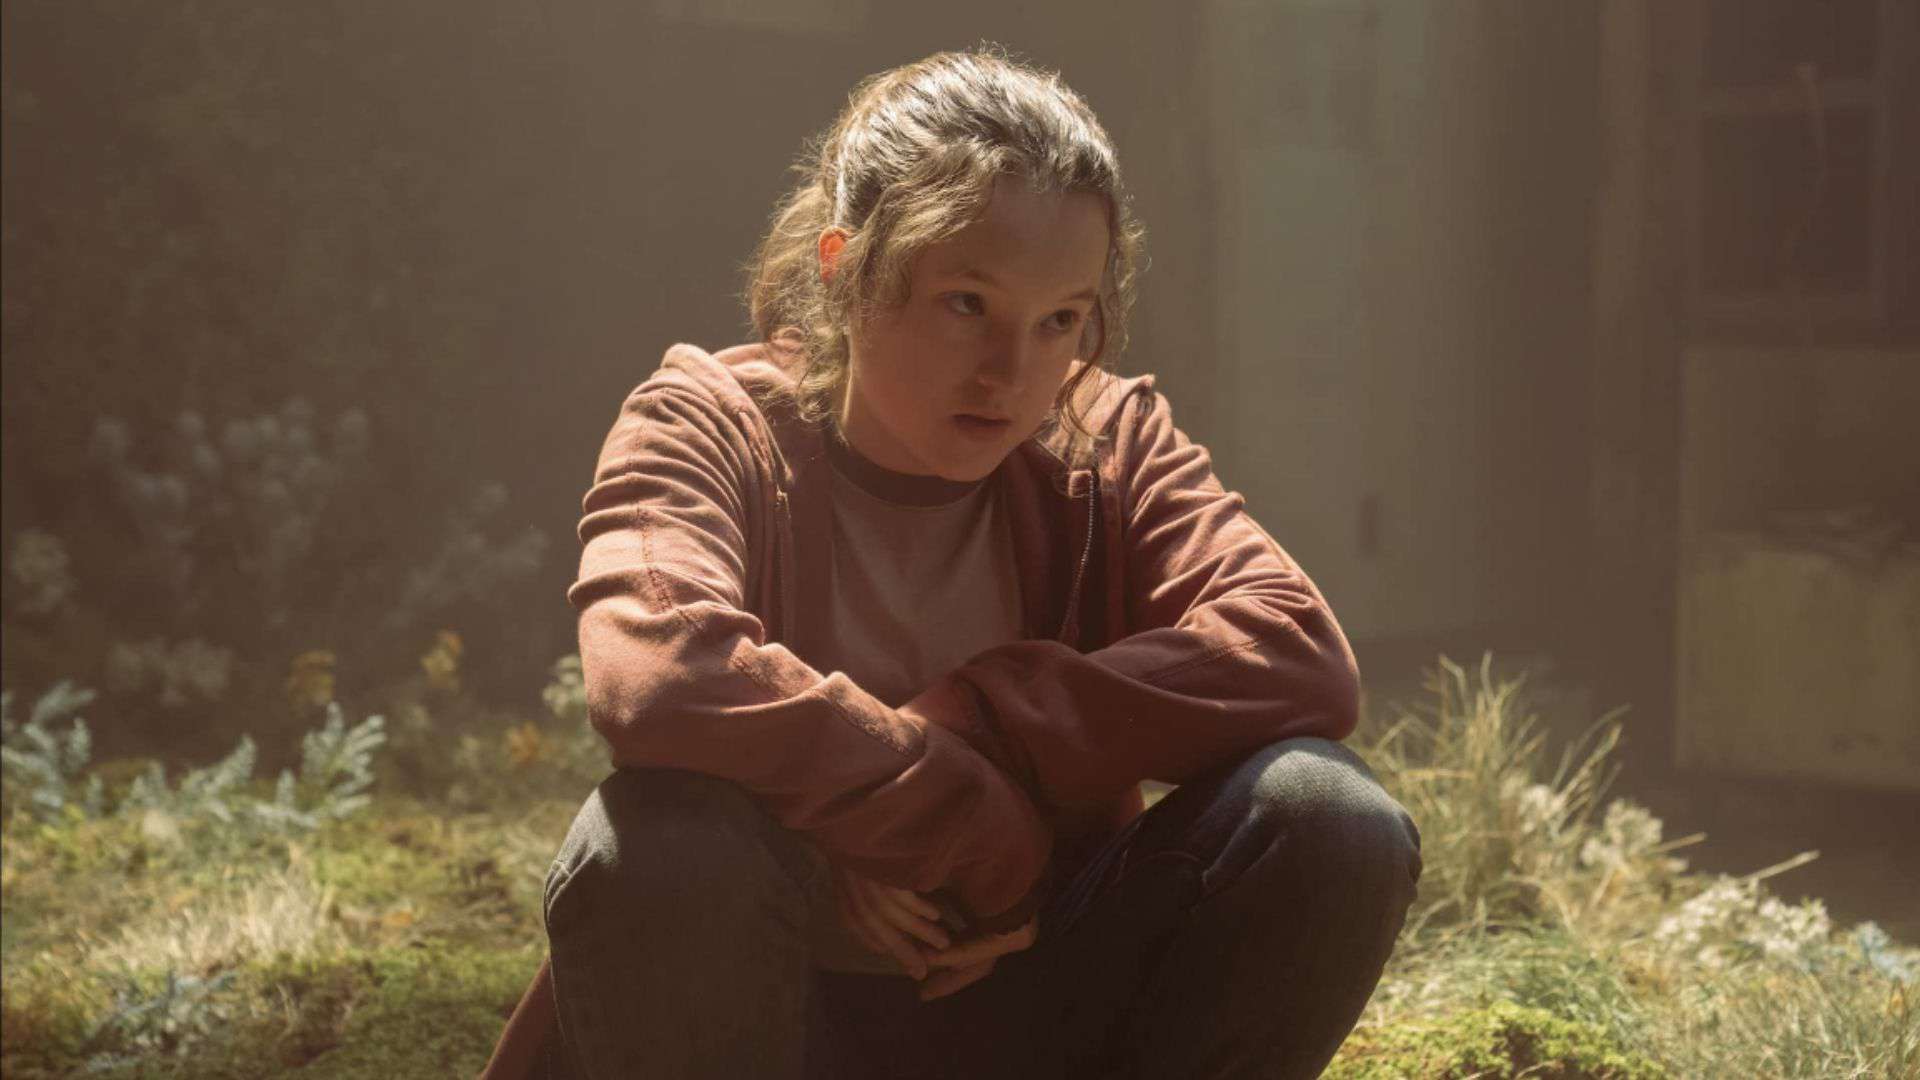 Bella Ramsey in a red sweater sitting on grass in this image from Sony Pictures Television.